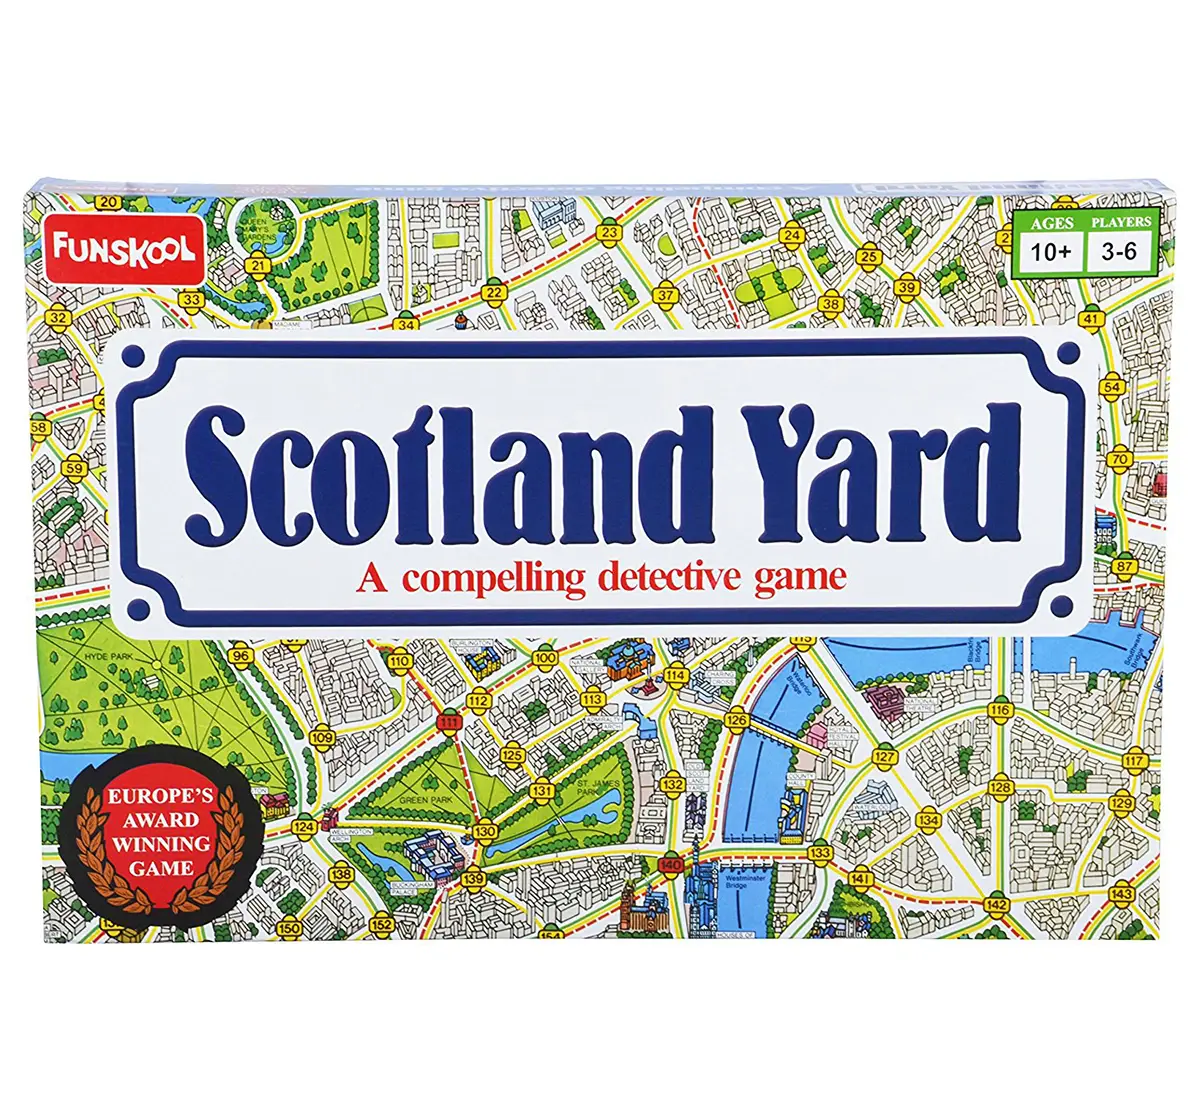 Funskool Scotland Yard Board Game, Thrilling Chase Game for Kids 10Y+